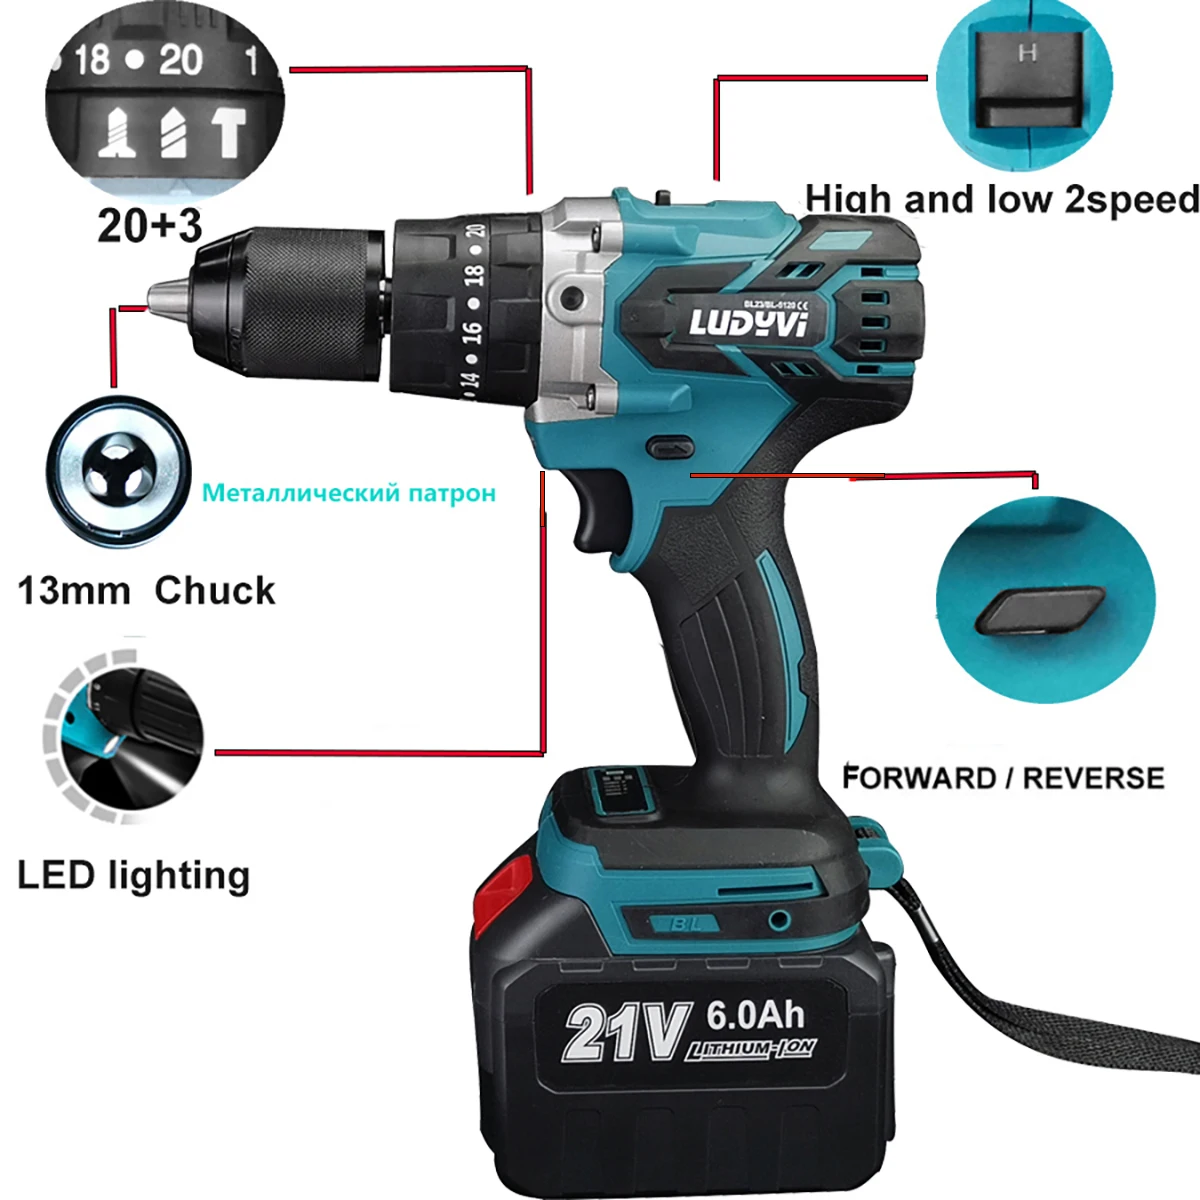 21V-13MM-Brushless-Electric-Drill-120N-M-4000mah-Battery-Cordless-Screwdriver-With-Impact-Function-Can-Drill.webp